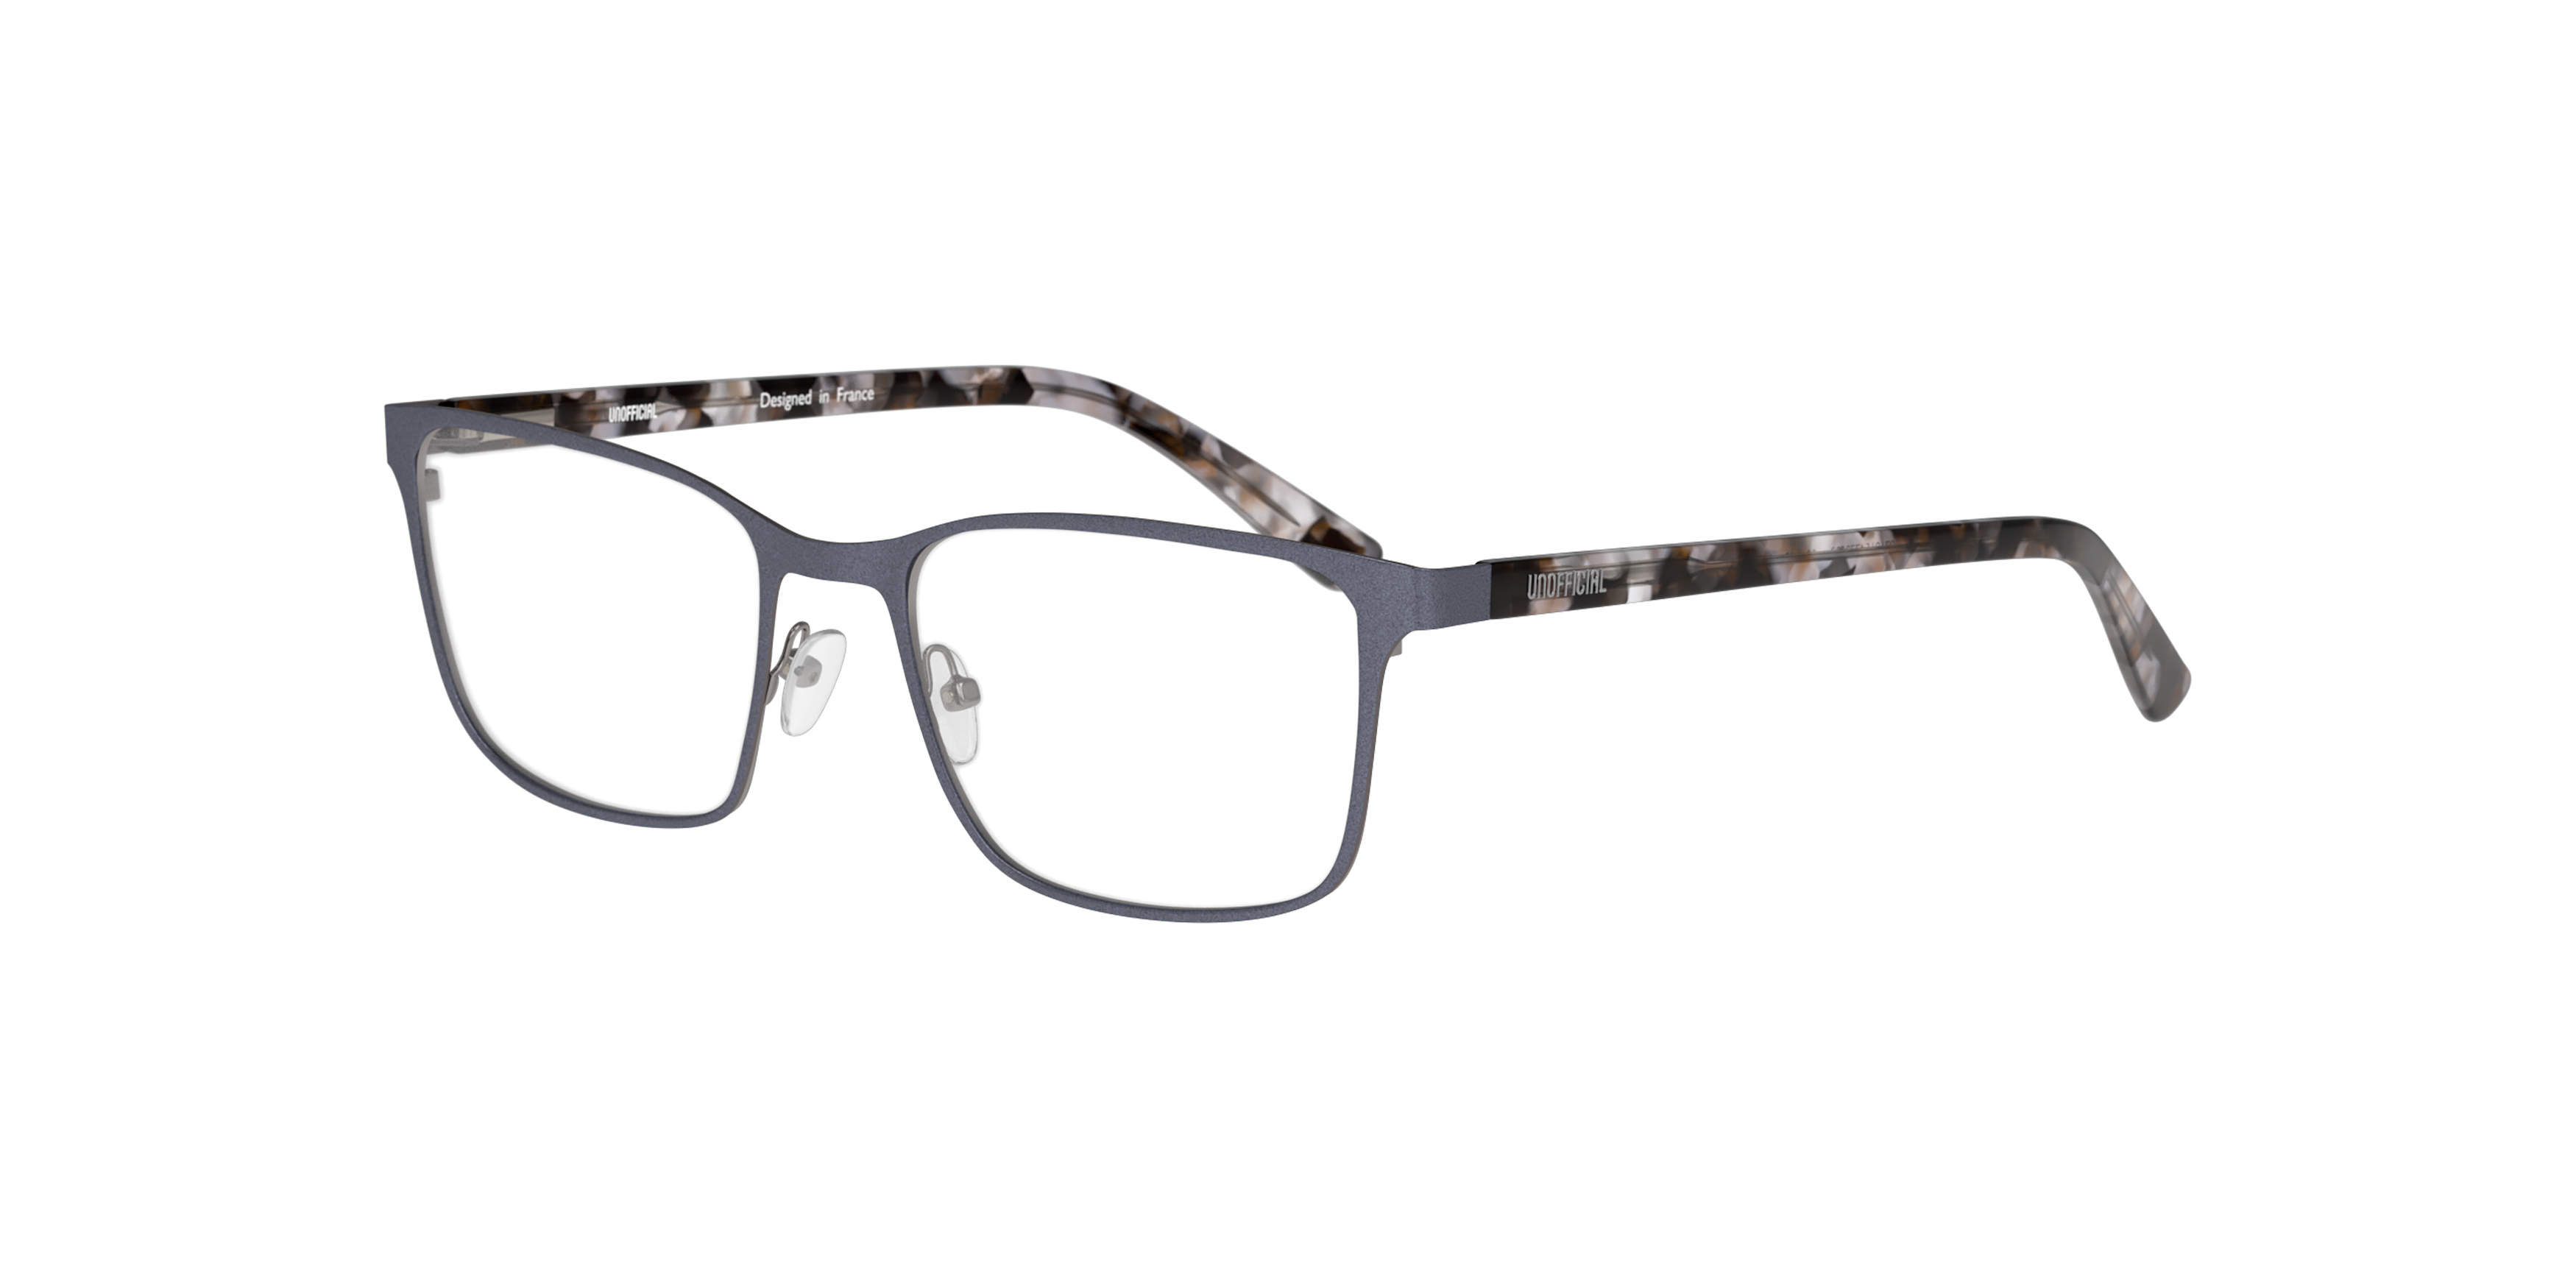 Angle_Left01 Unofficial UNOM0182 (GH00) Glasses Transparent / Grey